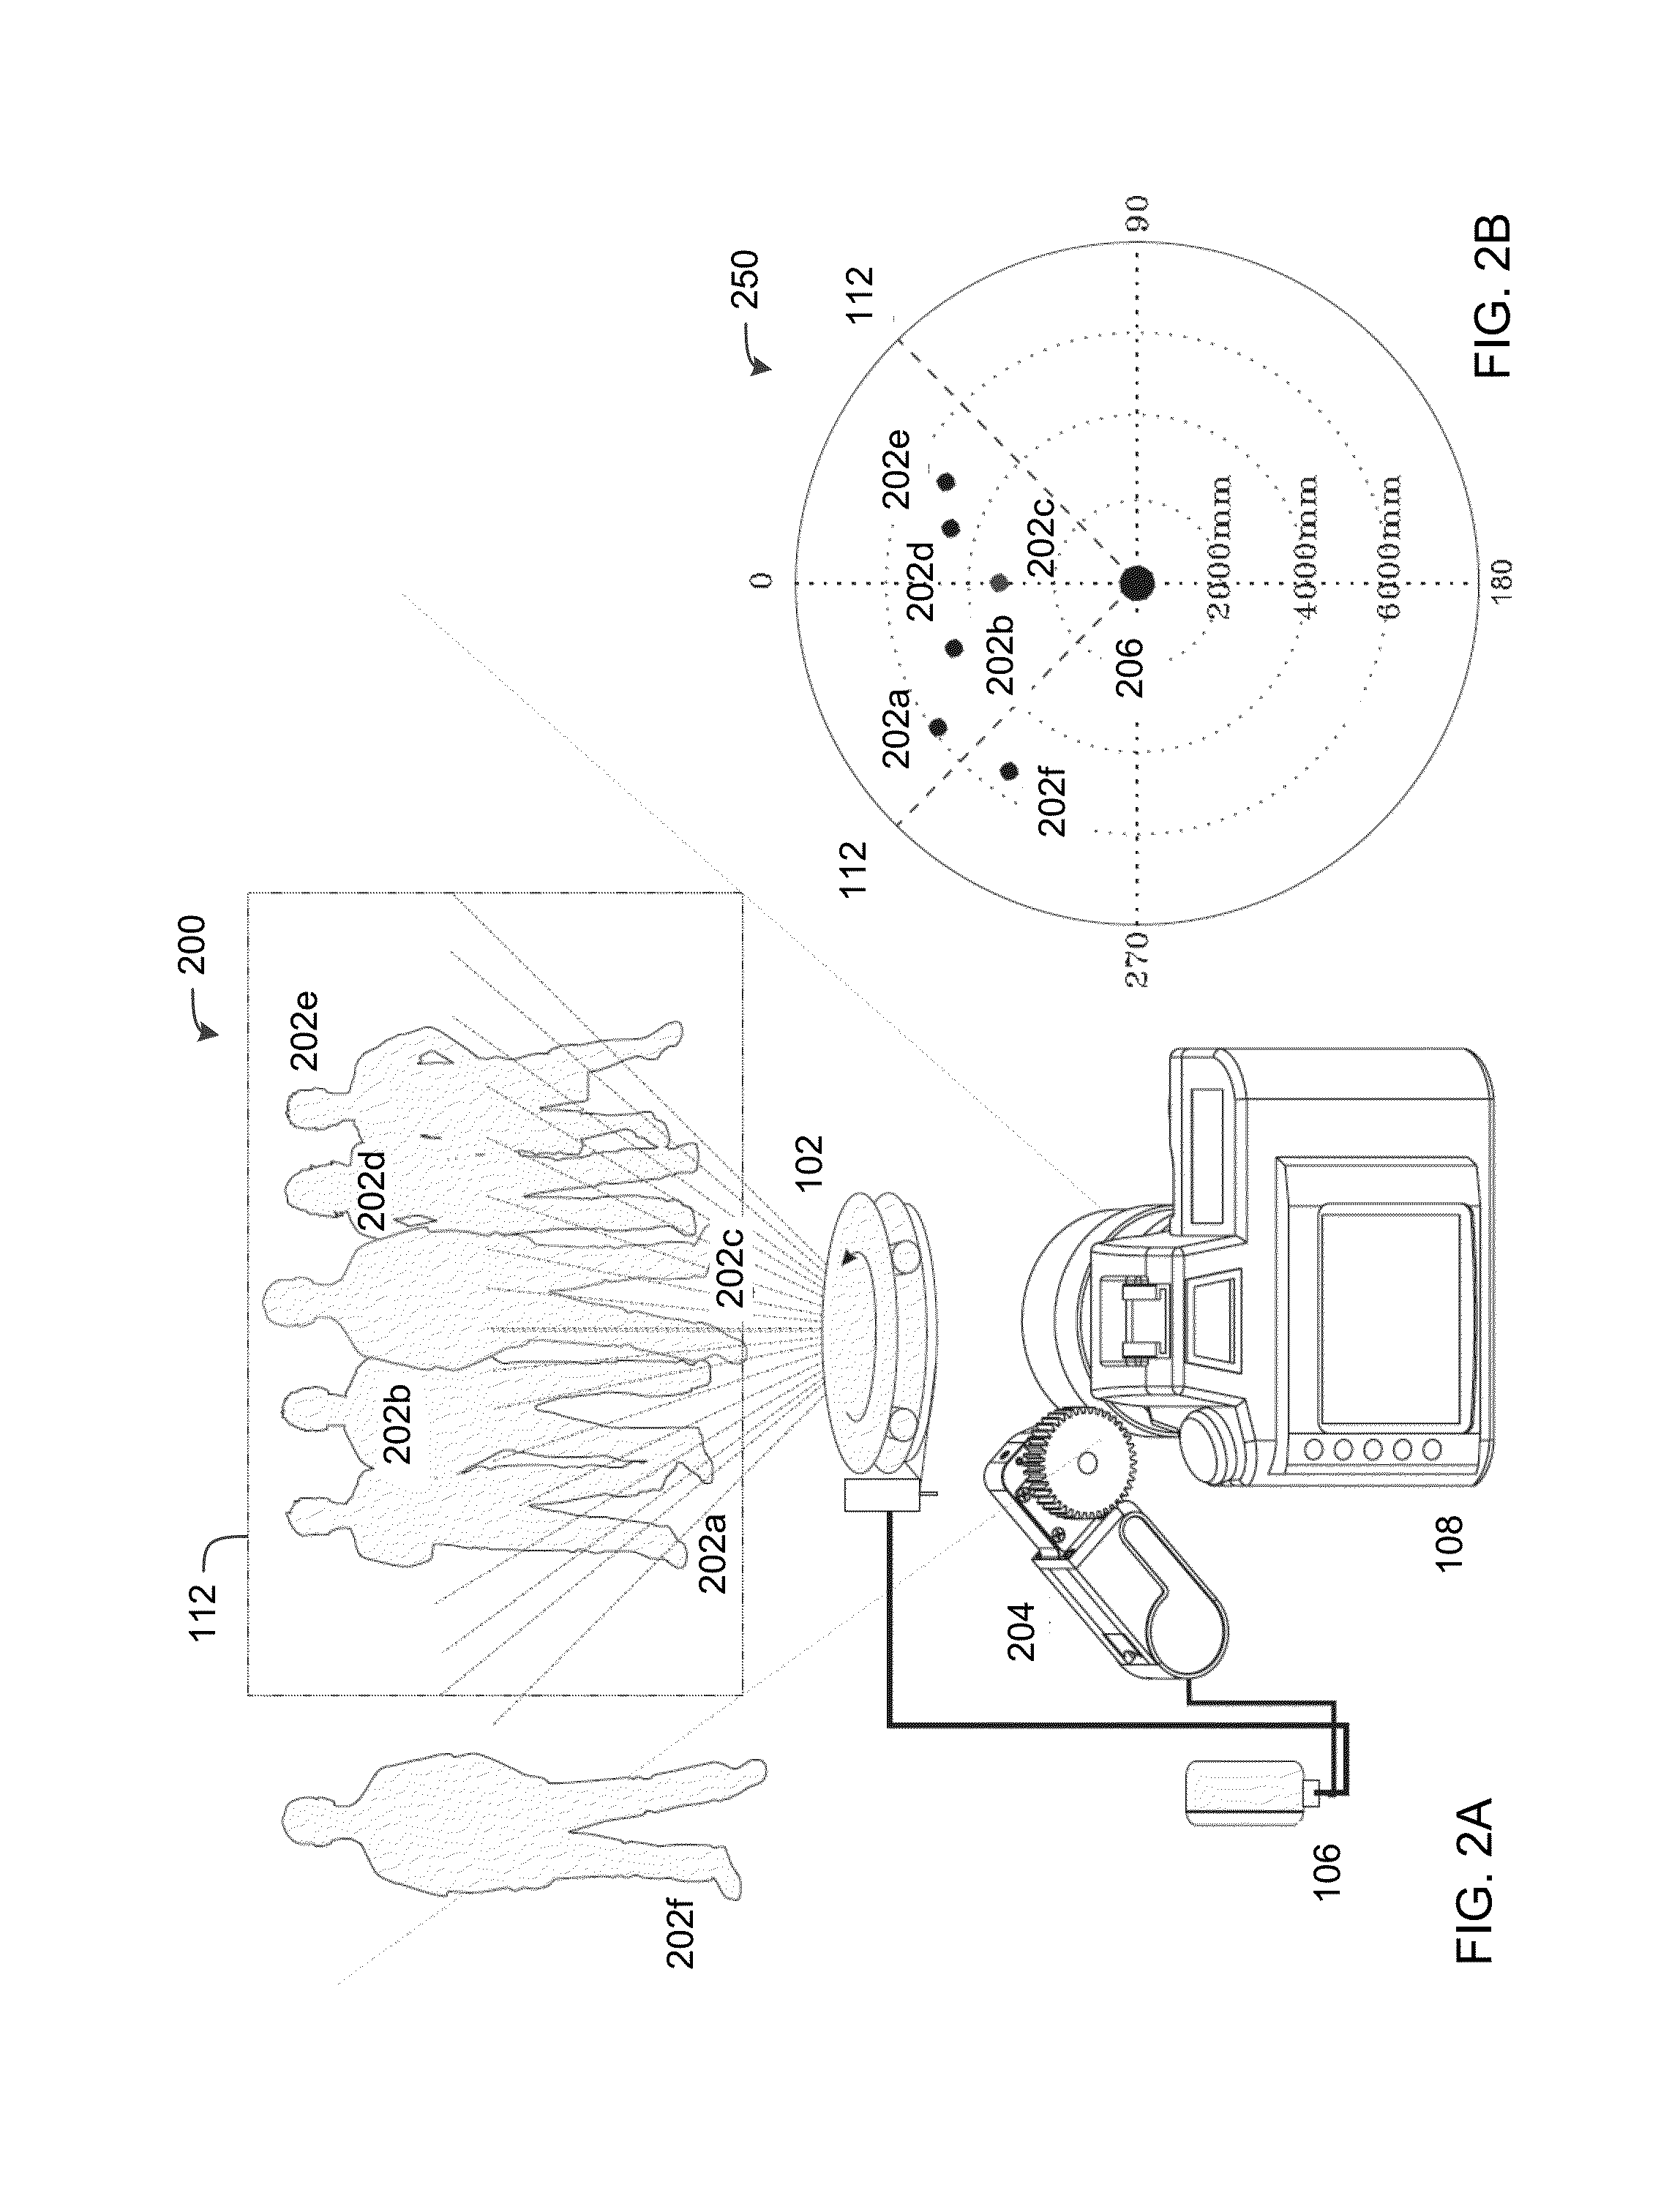 Lidar assisted focusing device